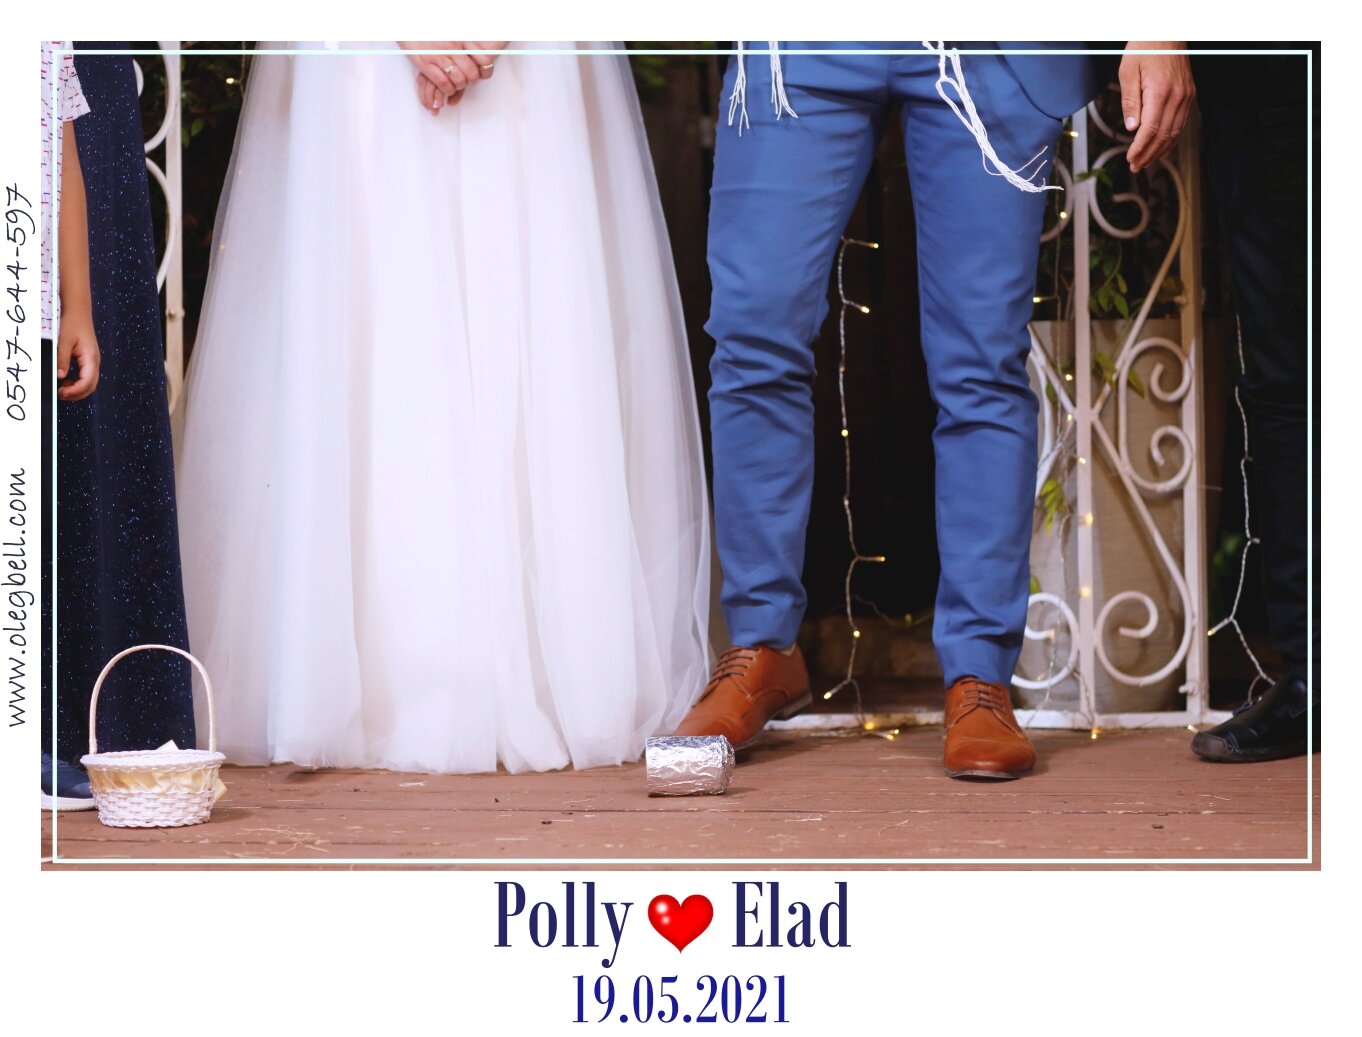 POLLY_AND_ELAD_WD_MG_SITE_026.JPG